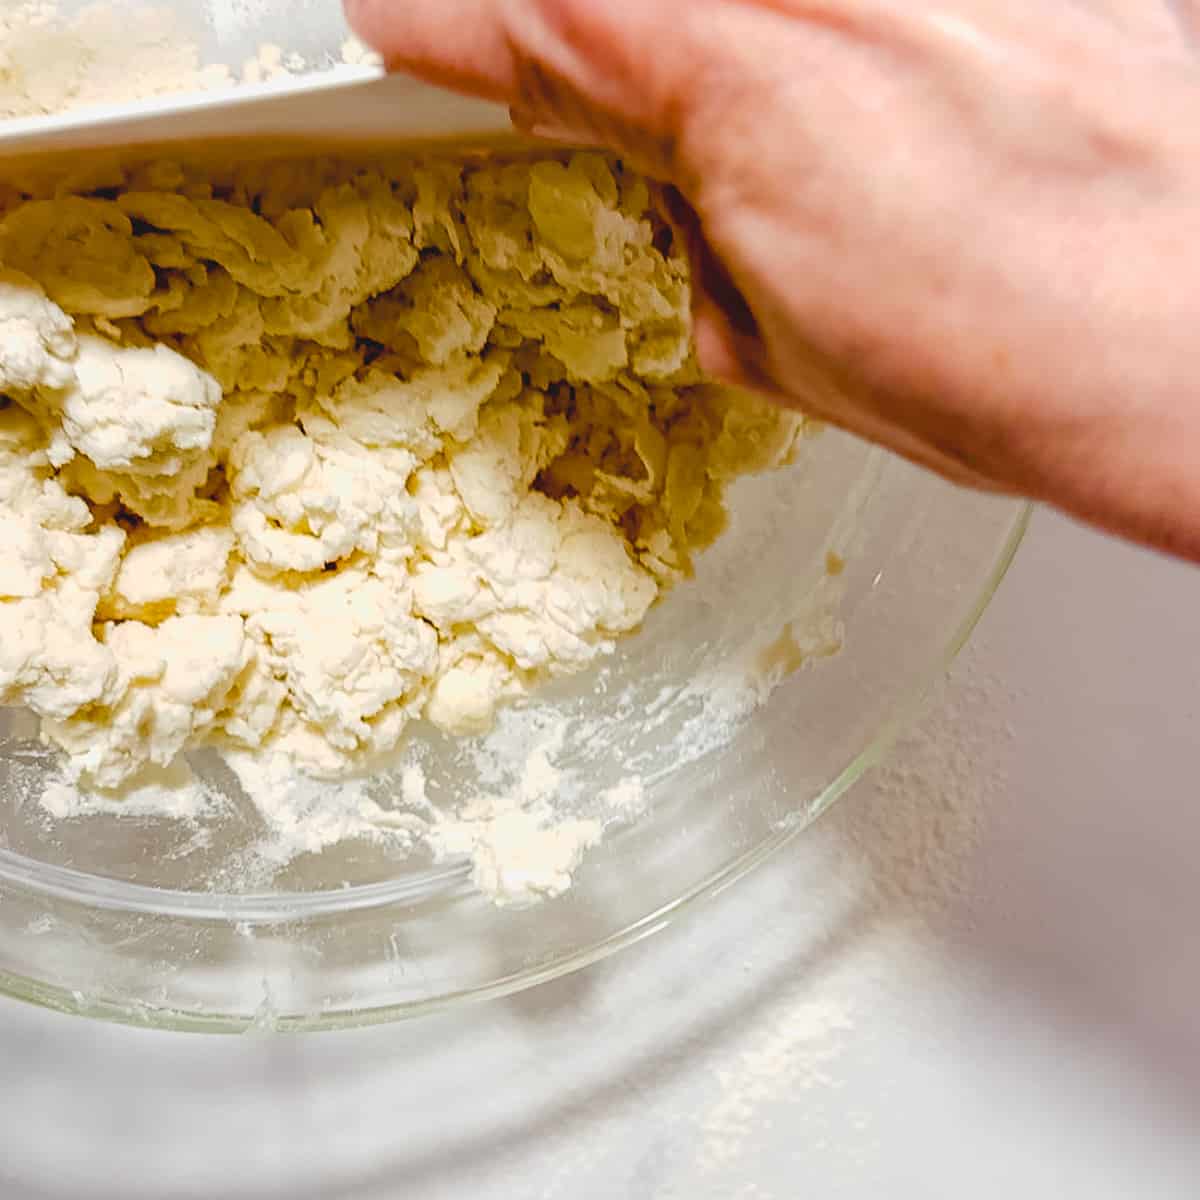 dumping biscuit dough out of bowl.